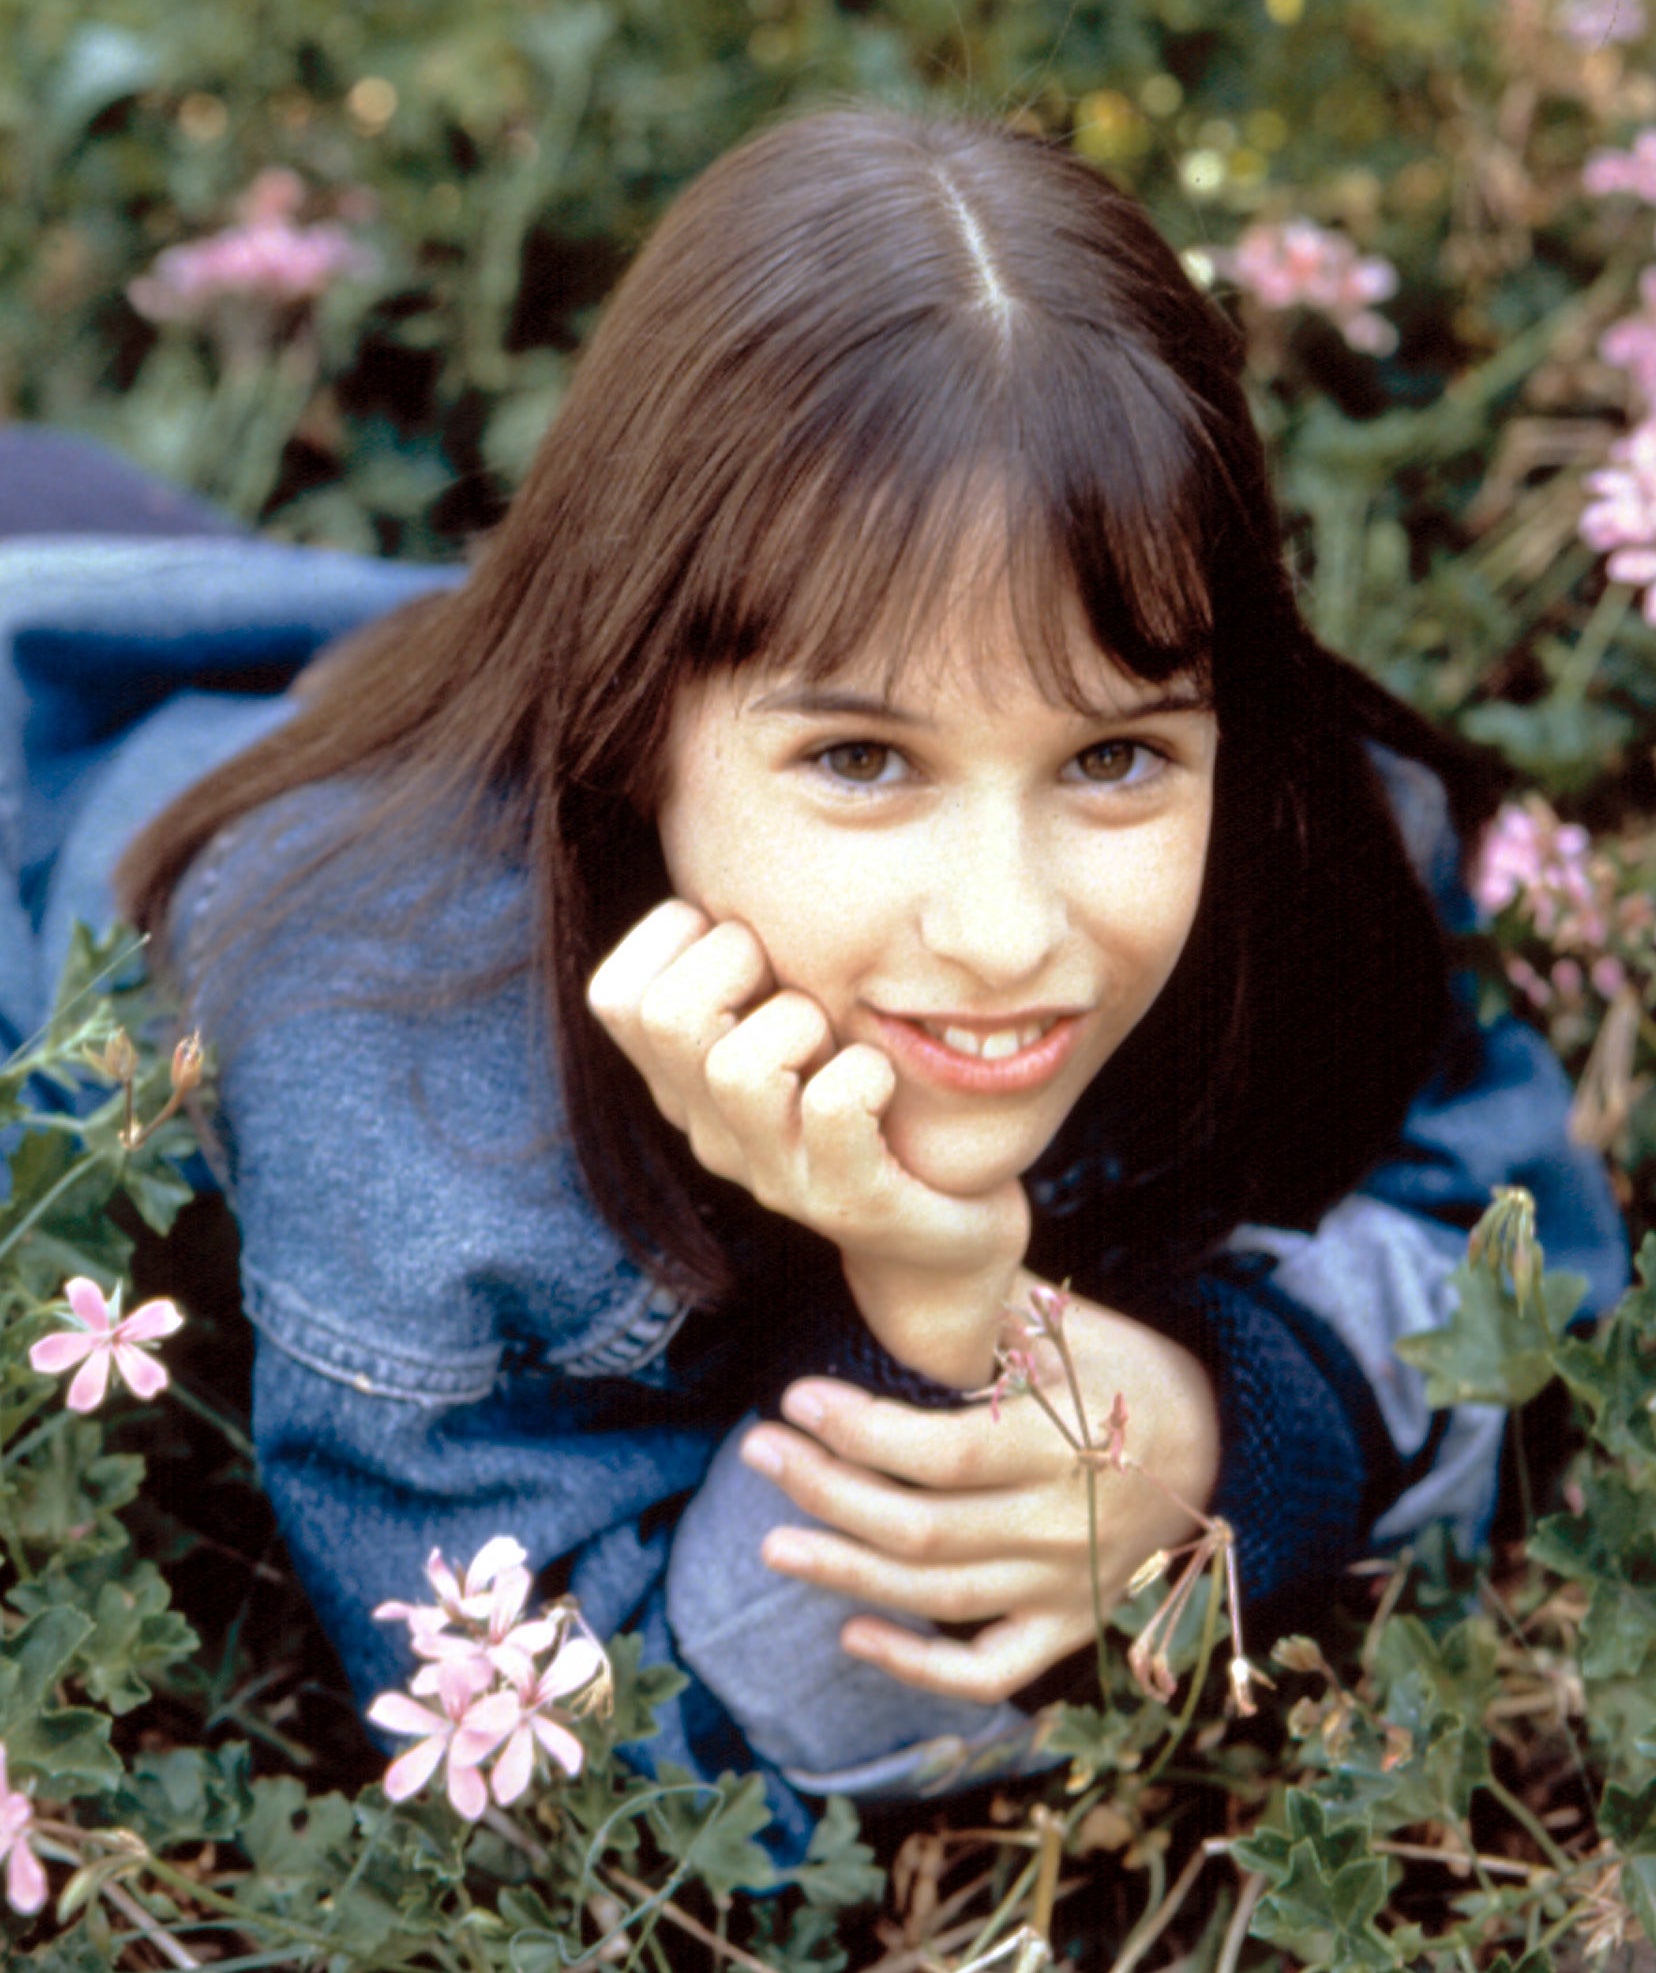 Lacey Chabert in Party of Five